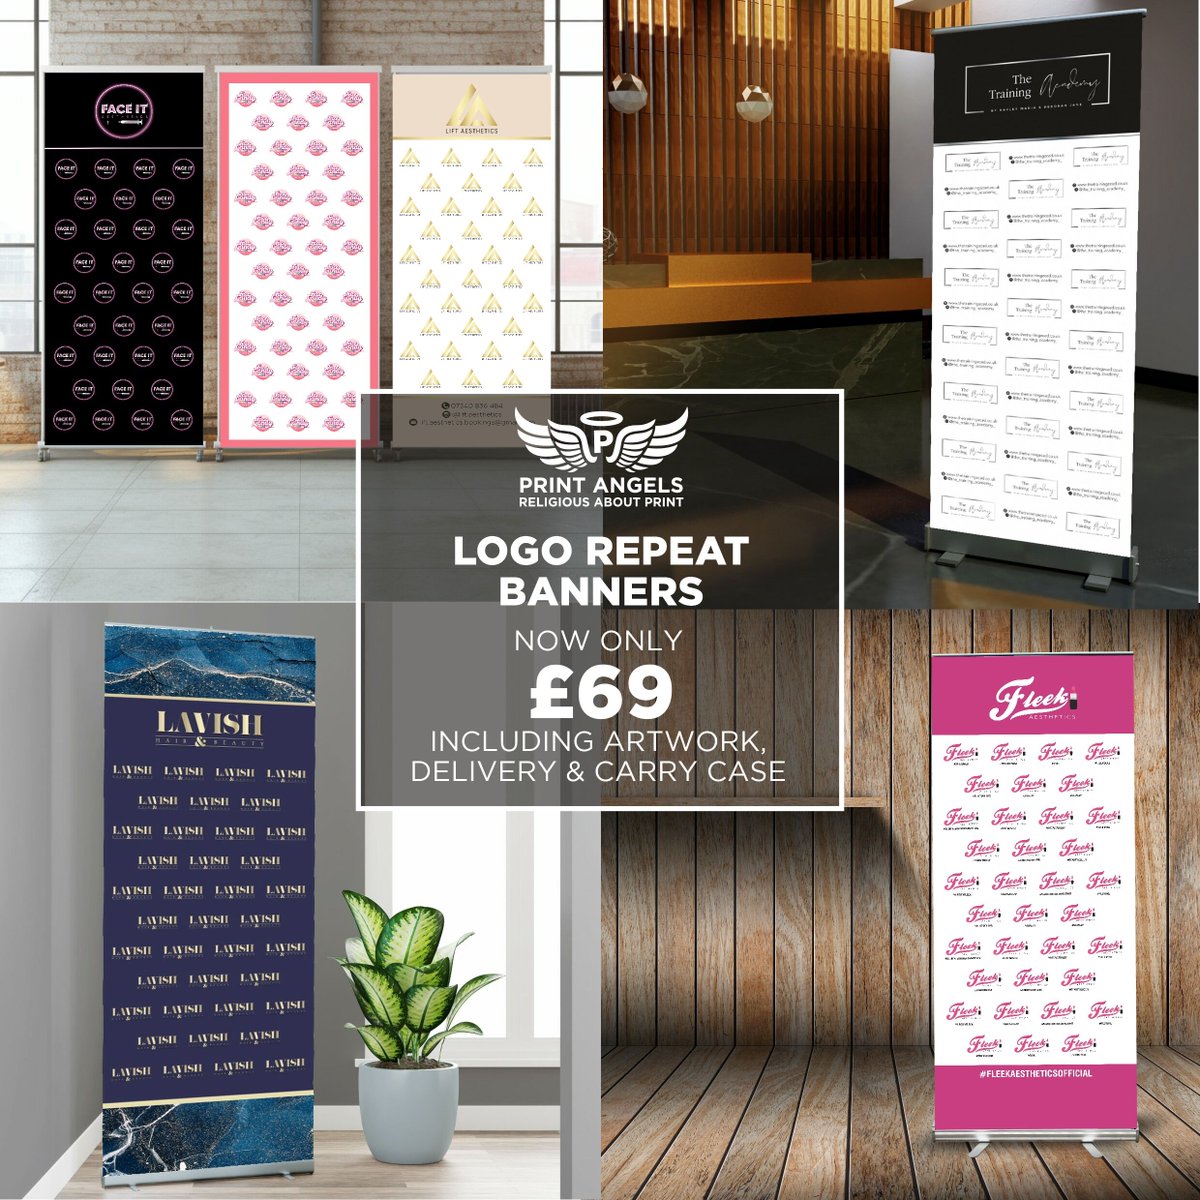 Our LOGO REPEAT Pull-Up Banners now only £69 including artwork, delivery & carry case! Comment or DM to order...
#giftvouchers #graphicdesigndaily #graphicdesign #worldwidedesigner #bespokedesigns #giftvoucherdesign #printingservices #specialistprinting #budgetprint #luxebranding